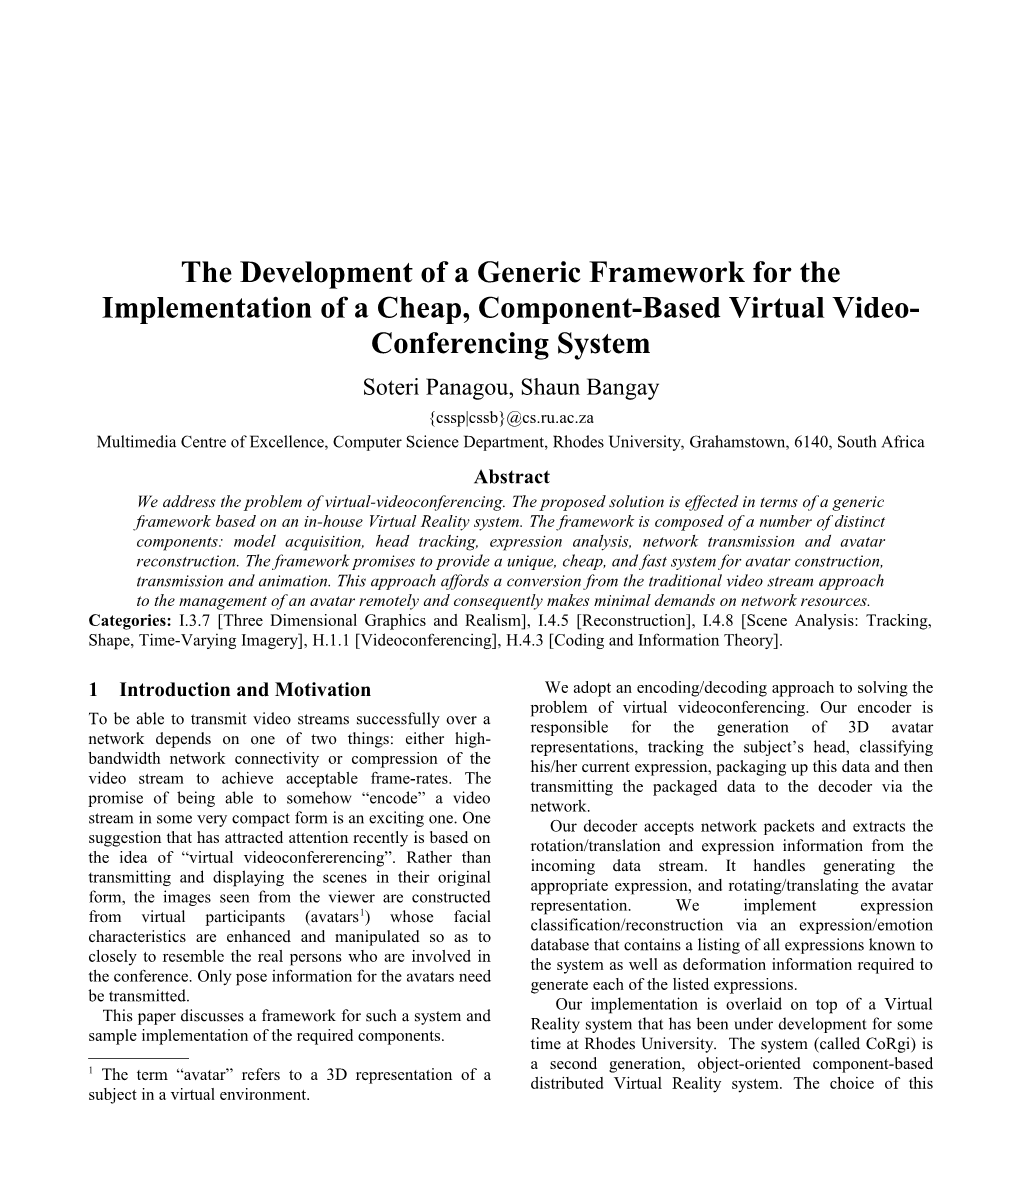 The Development of a Generic Framework for the Implementation of a Cheap, Component-Based